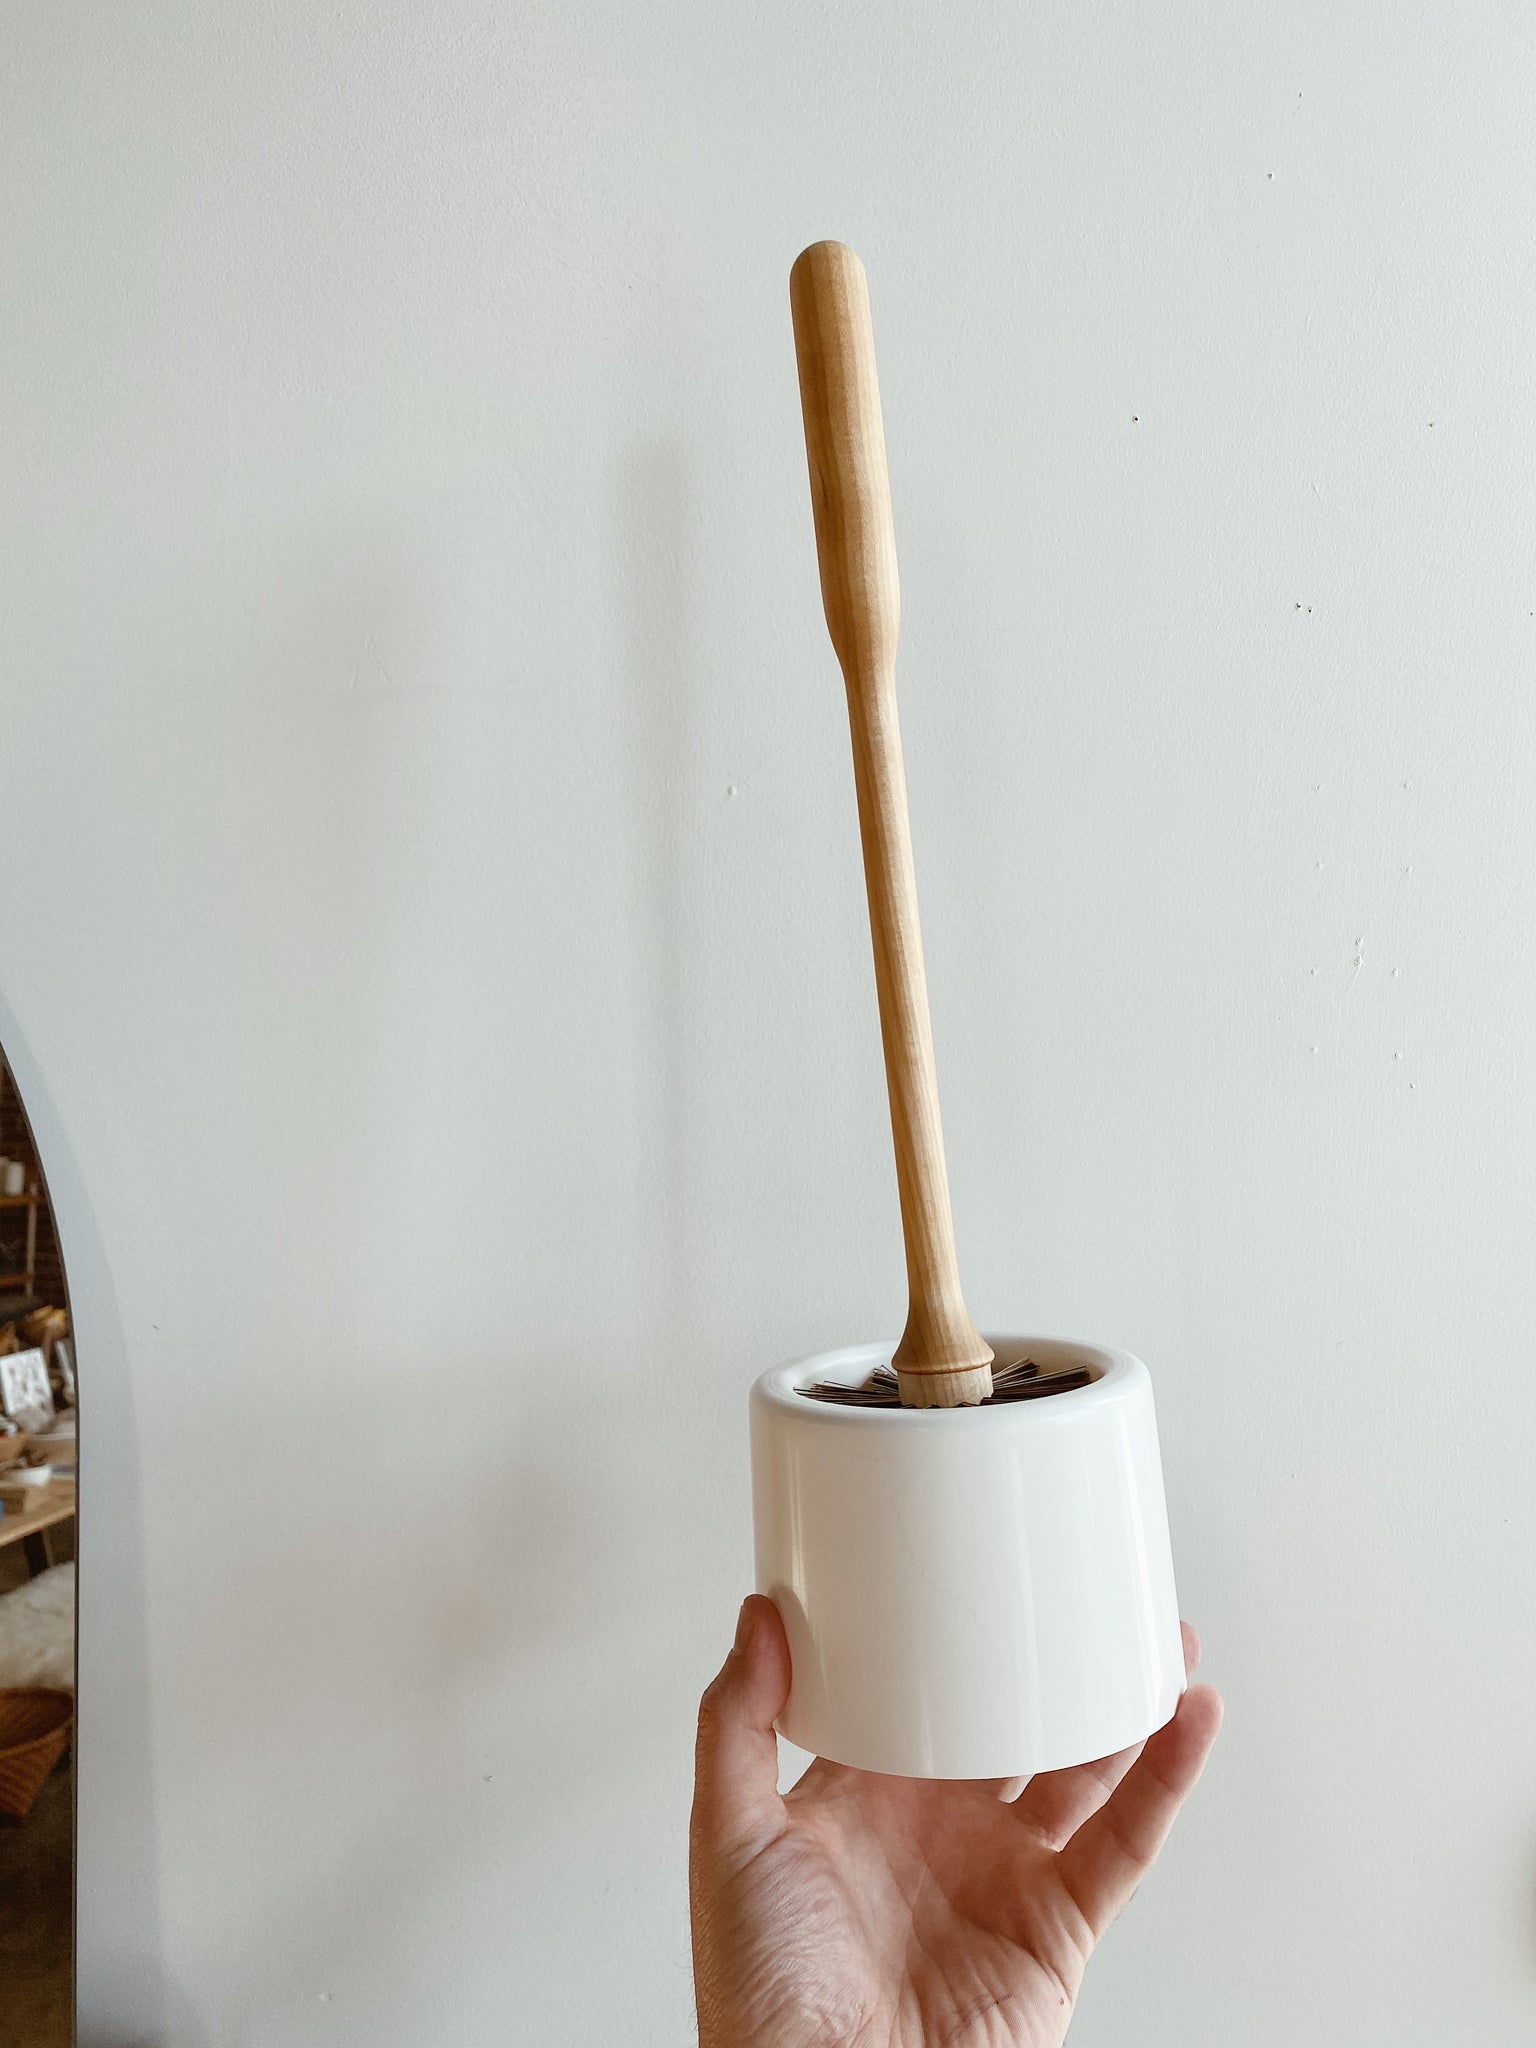 Wooden Toilet Brush and Plastic Cup